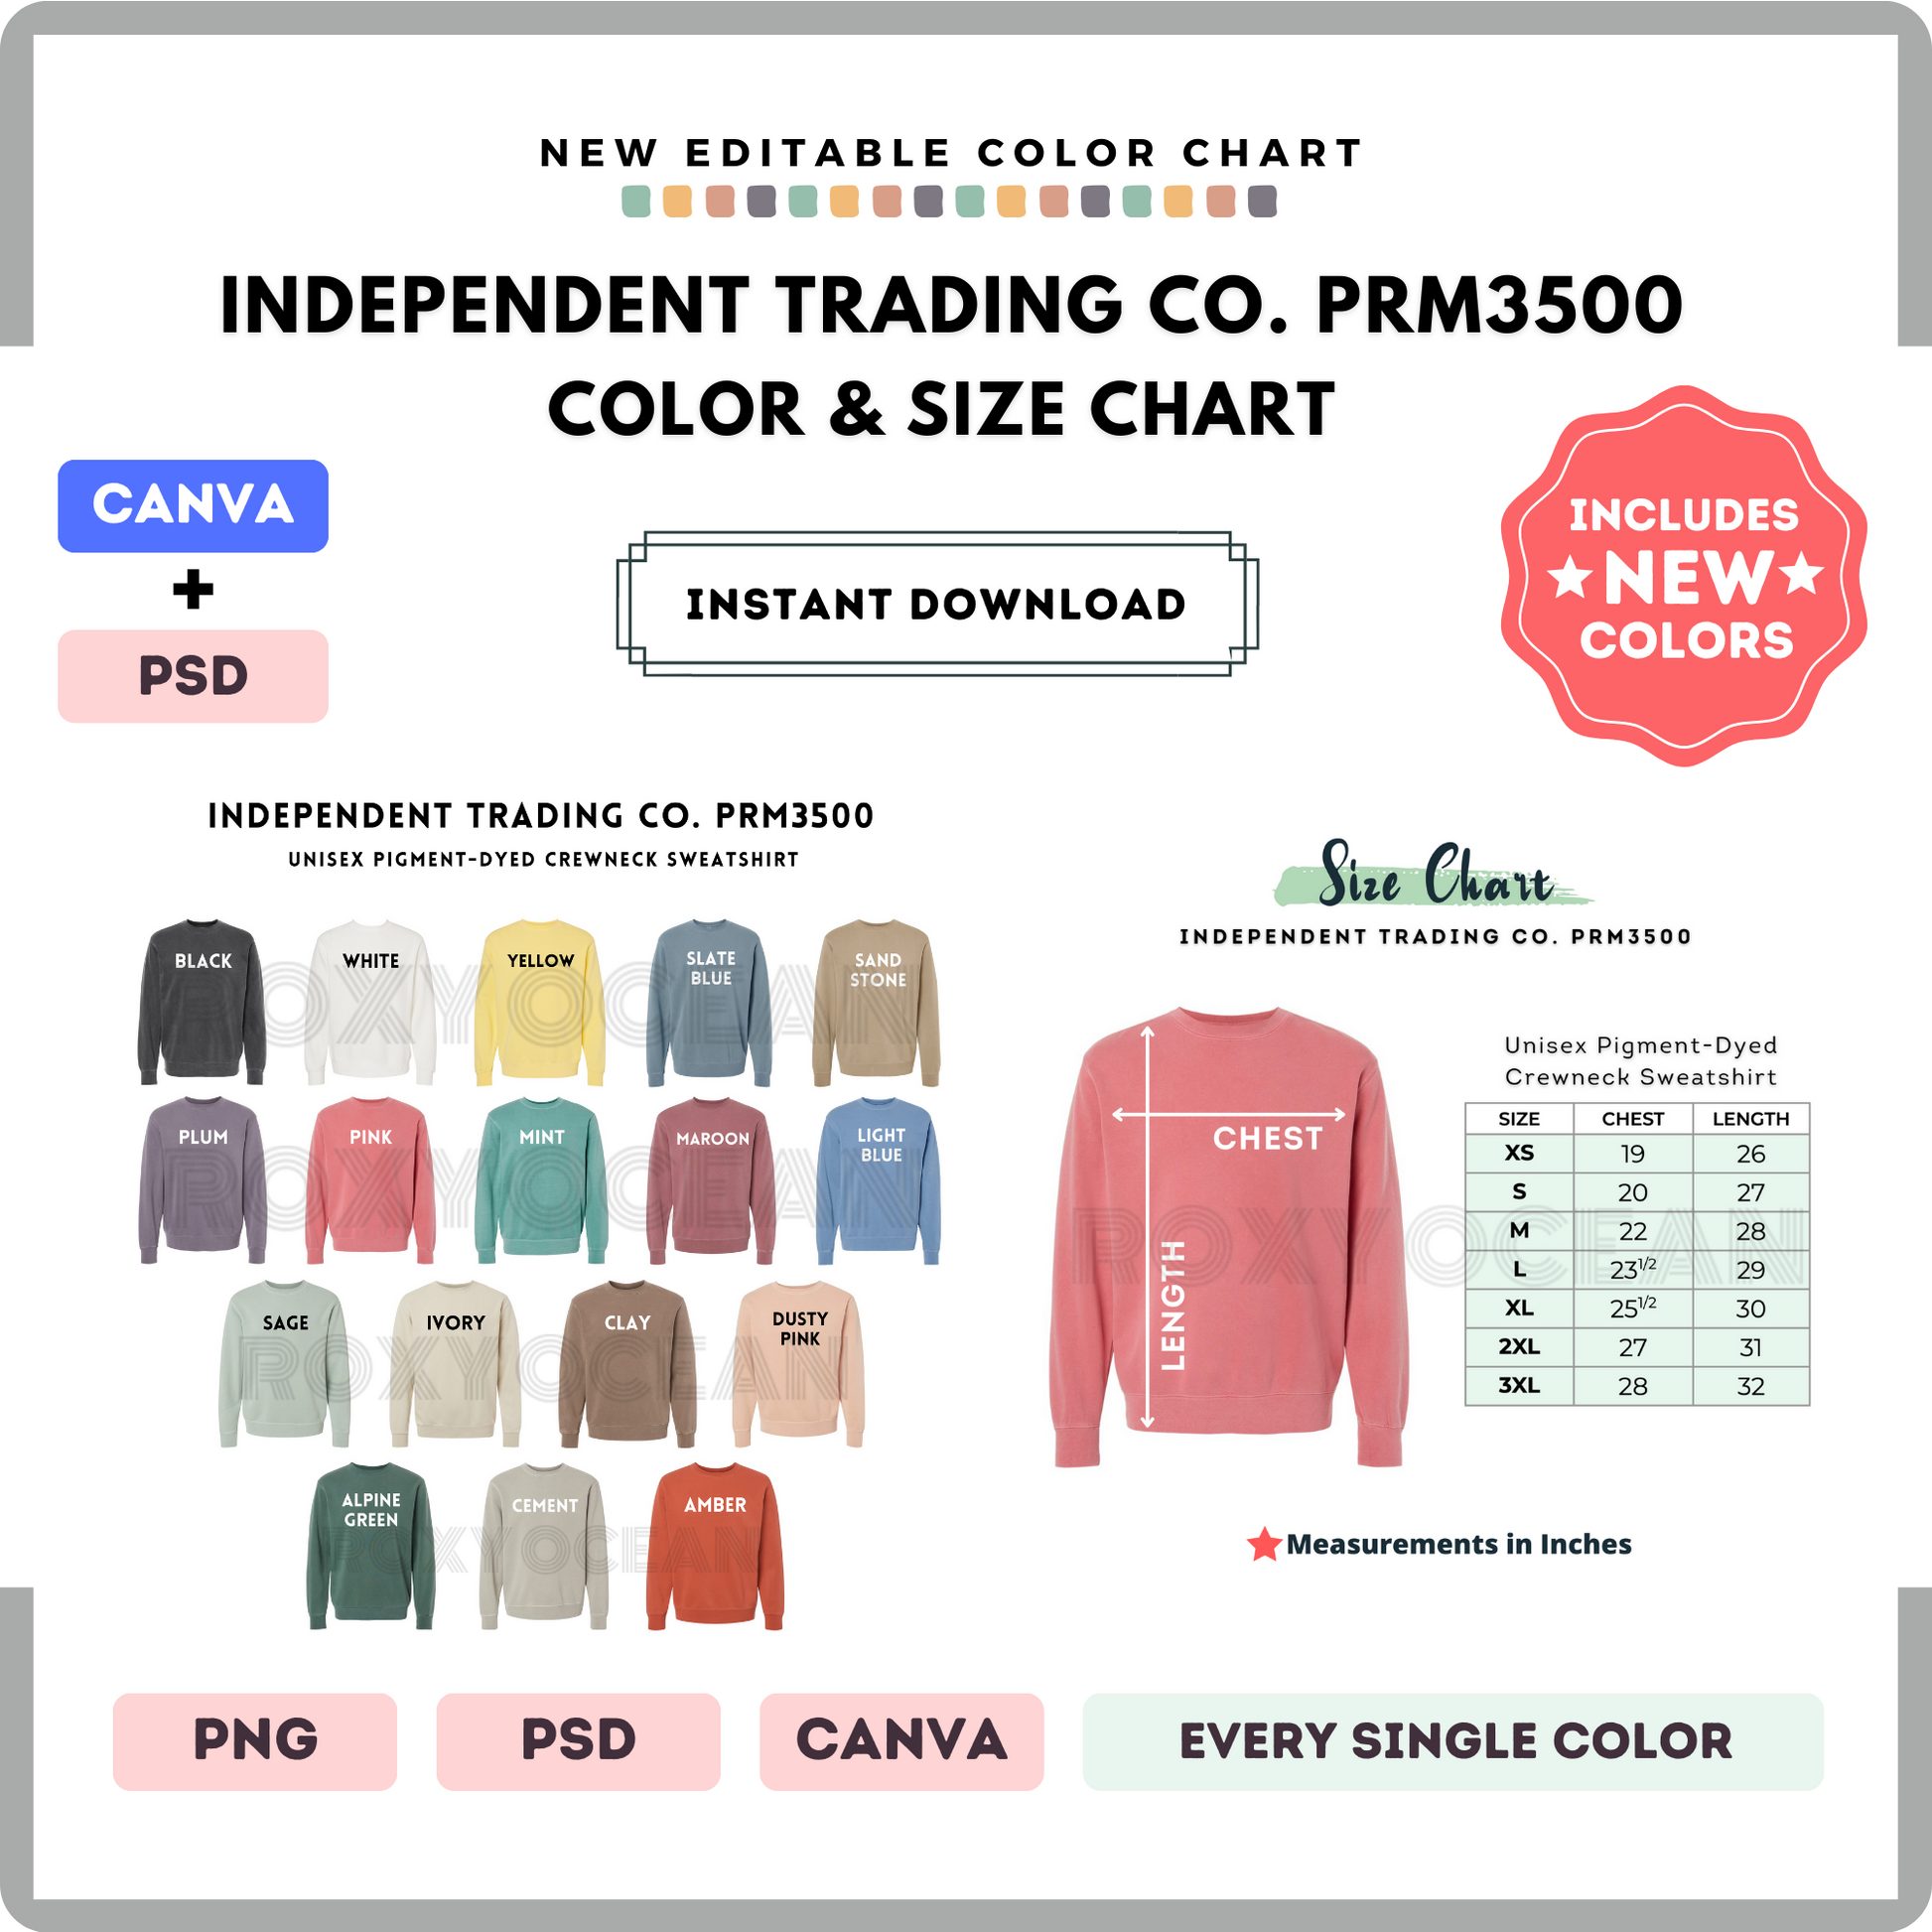 Independent Trading Co.PRM3500 Color and Size Chart